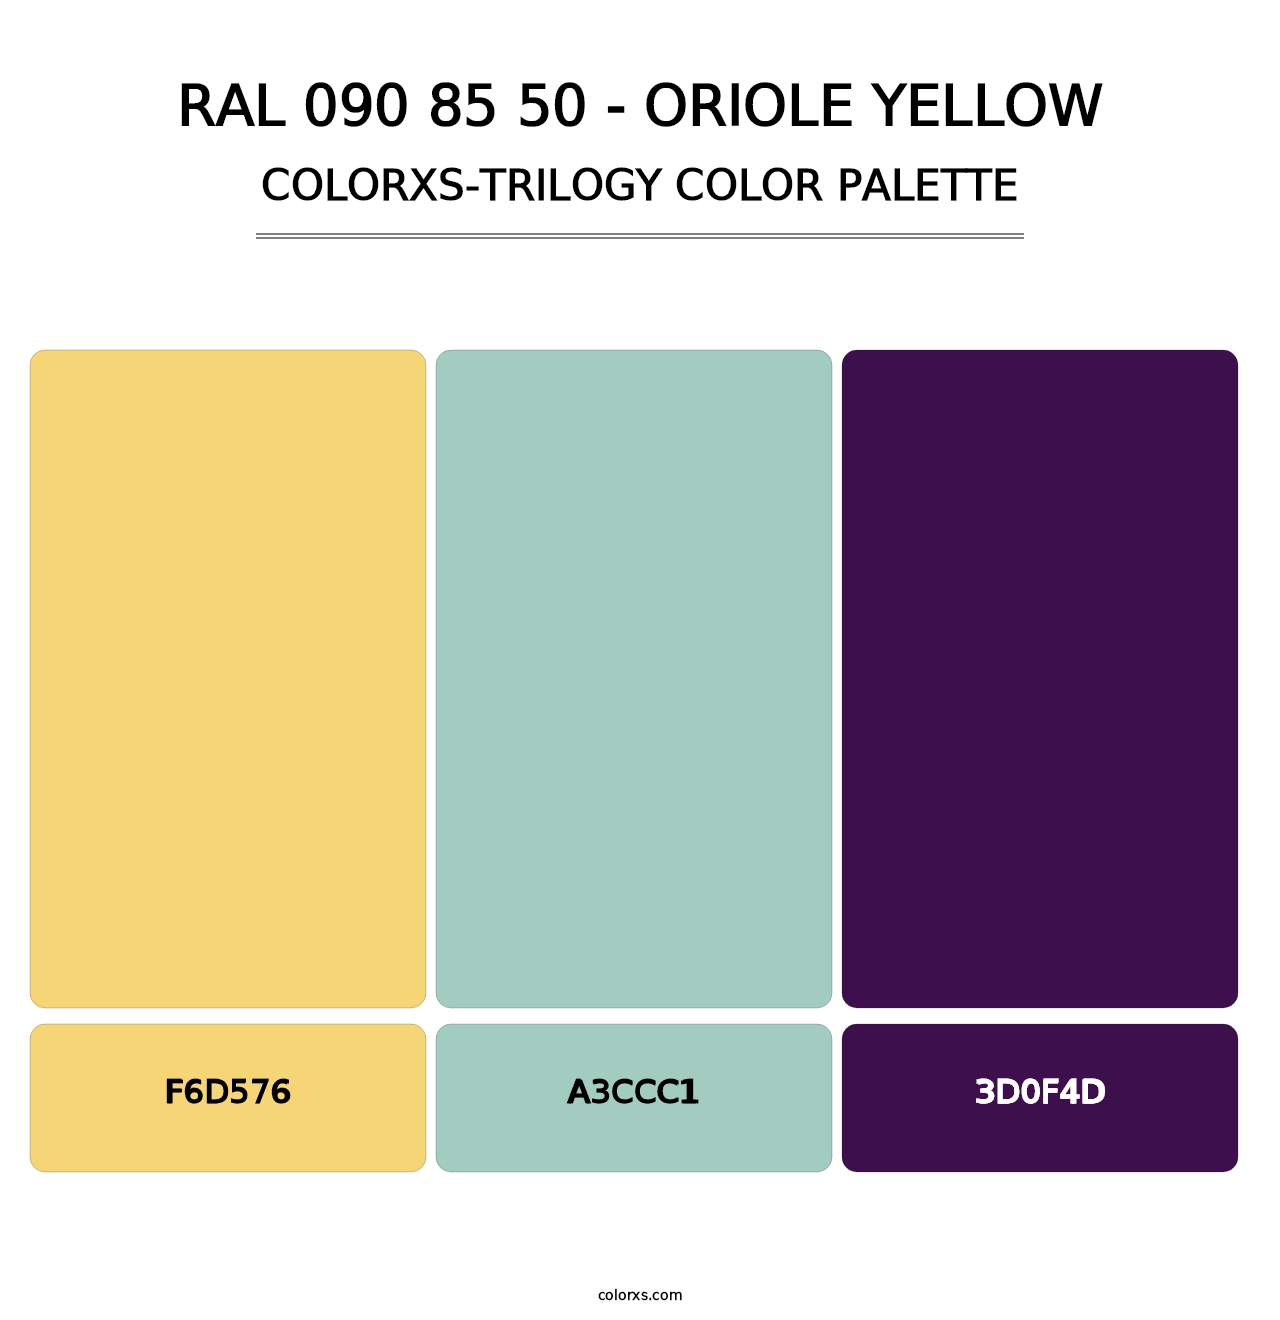 RAL 090 85 50 - Oriole Yellow - Colorxs Trilogy Palette